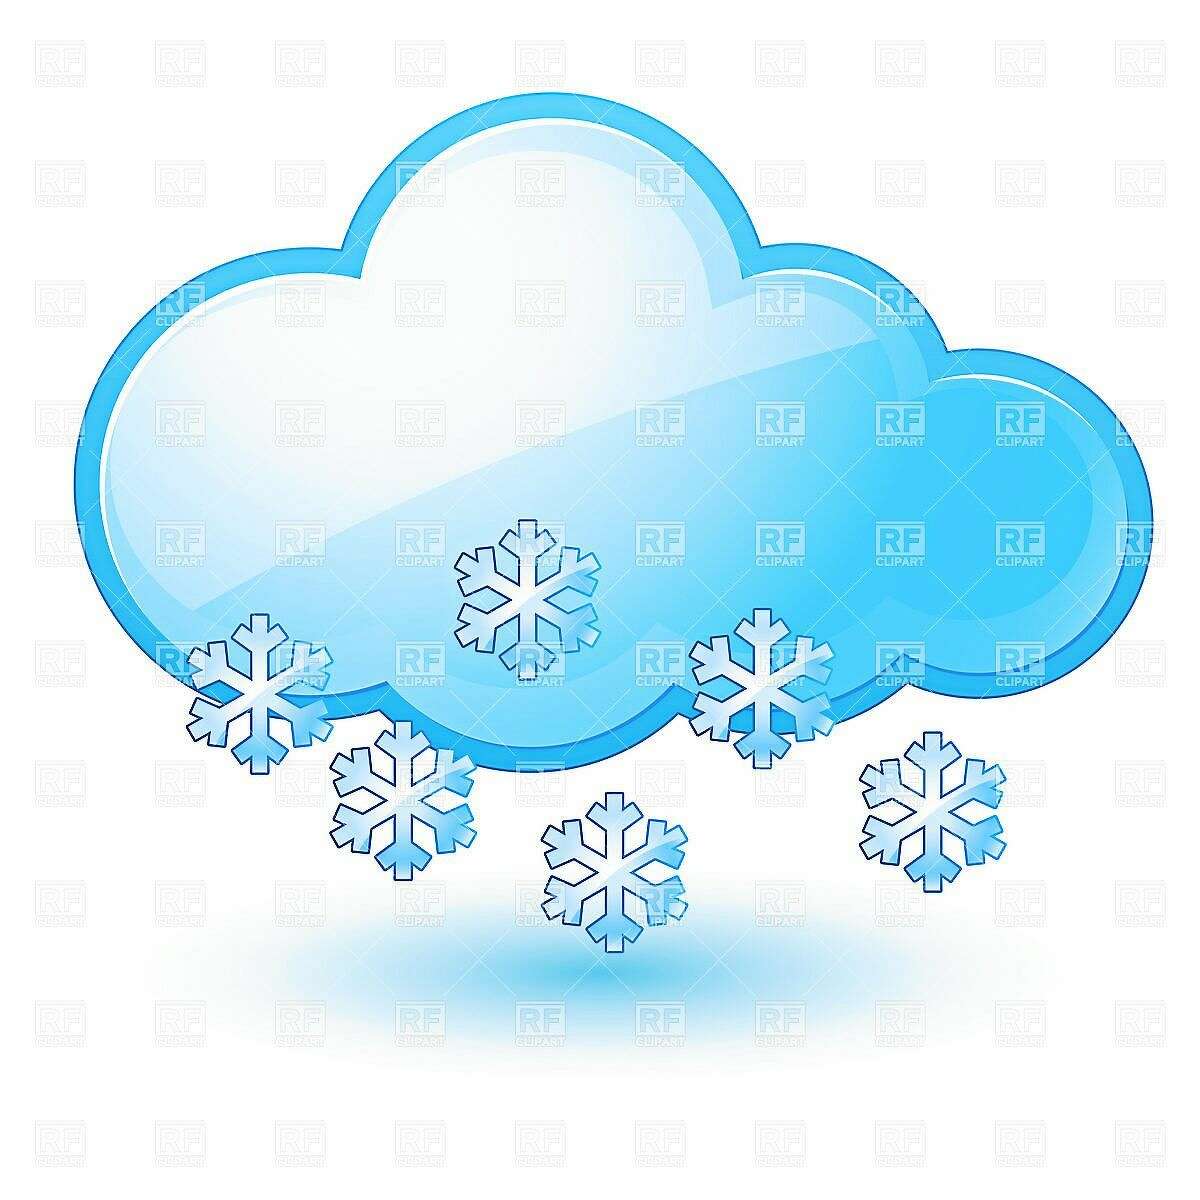 Single weather icon - Cloud with Snow. Illustration on white